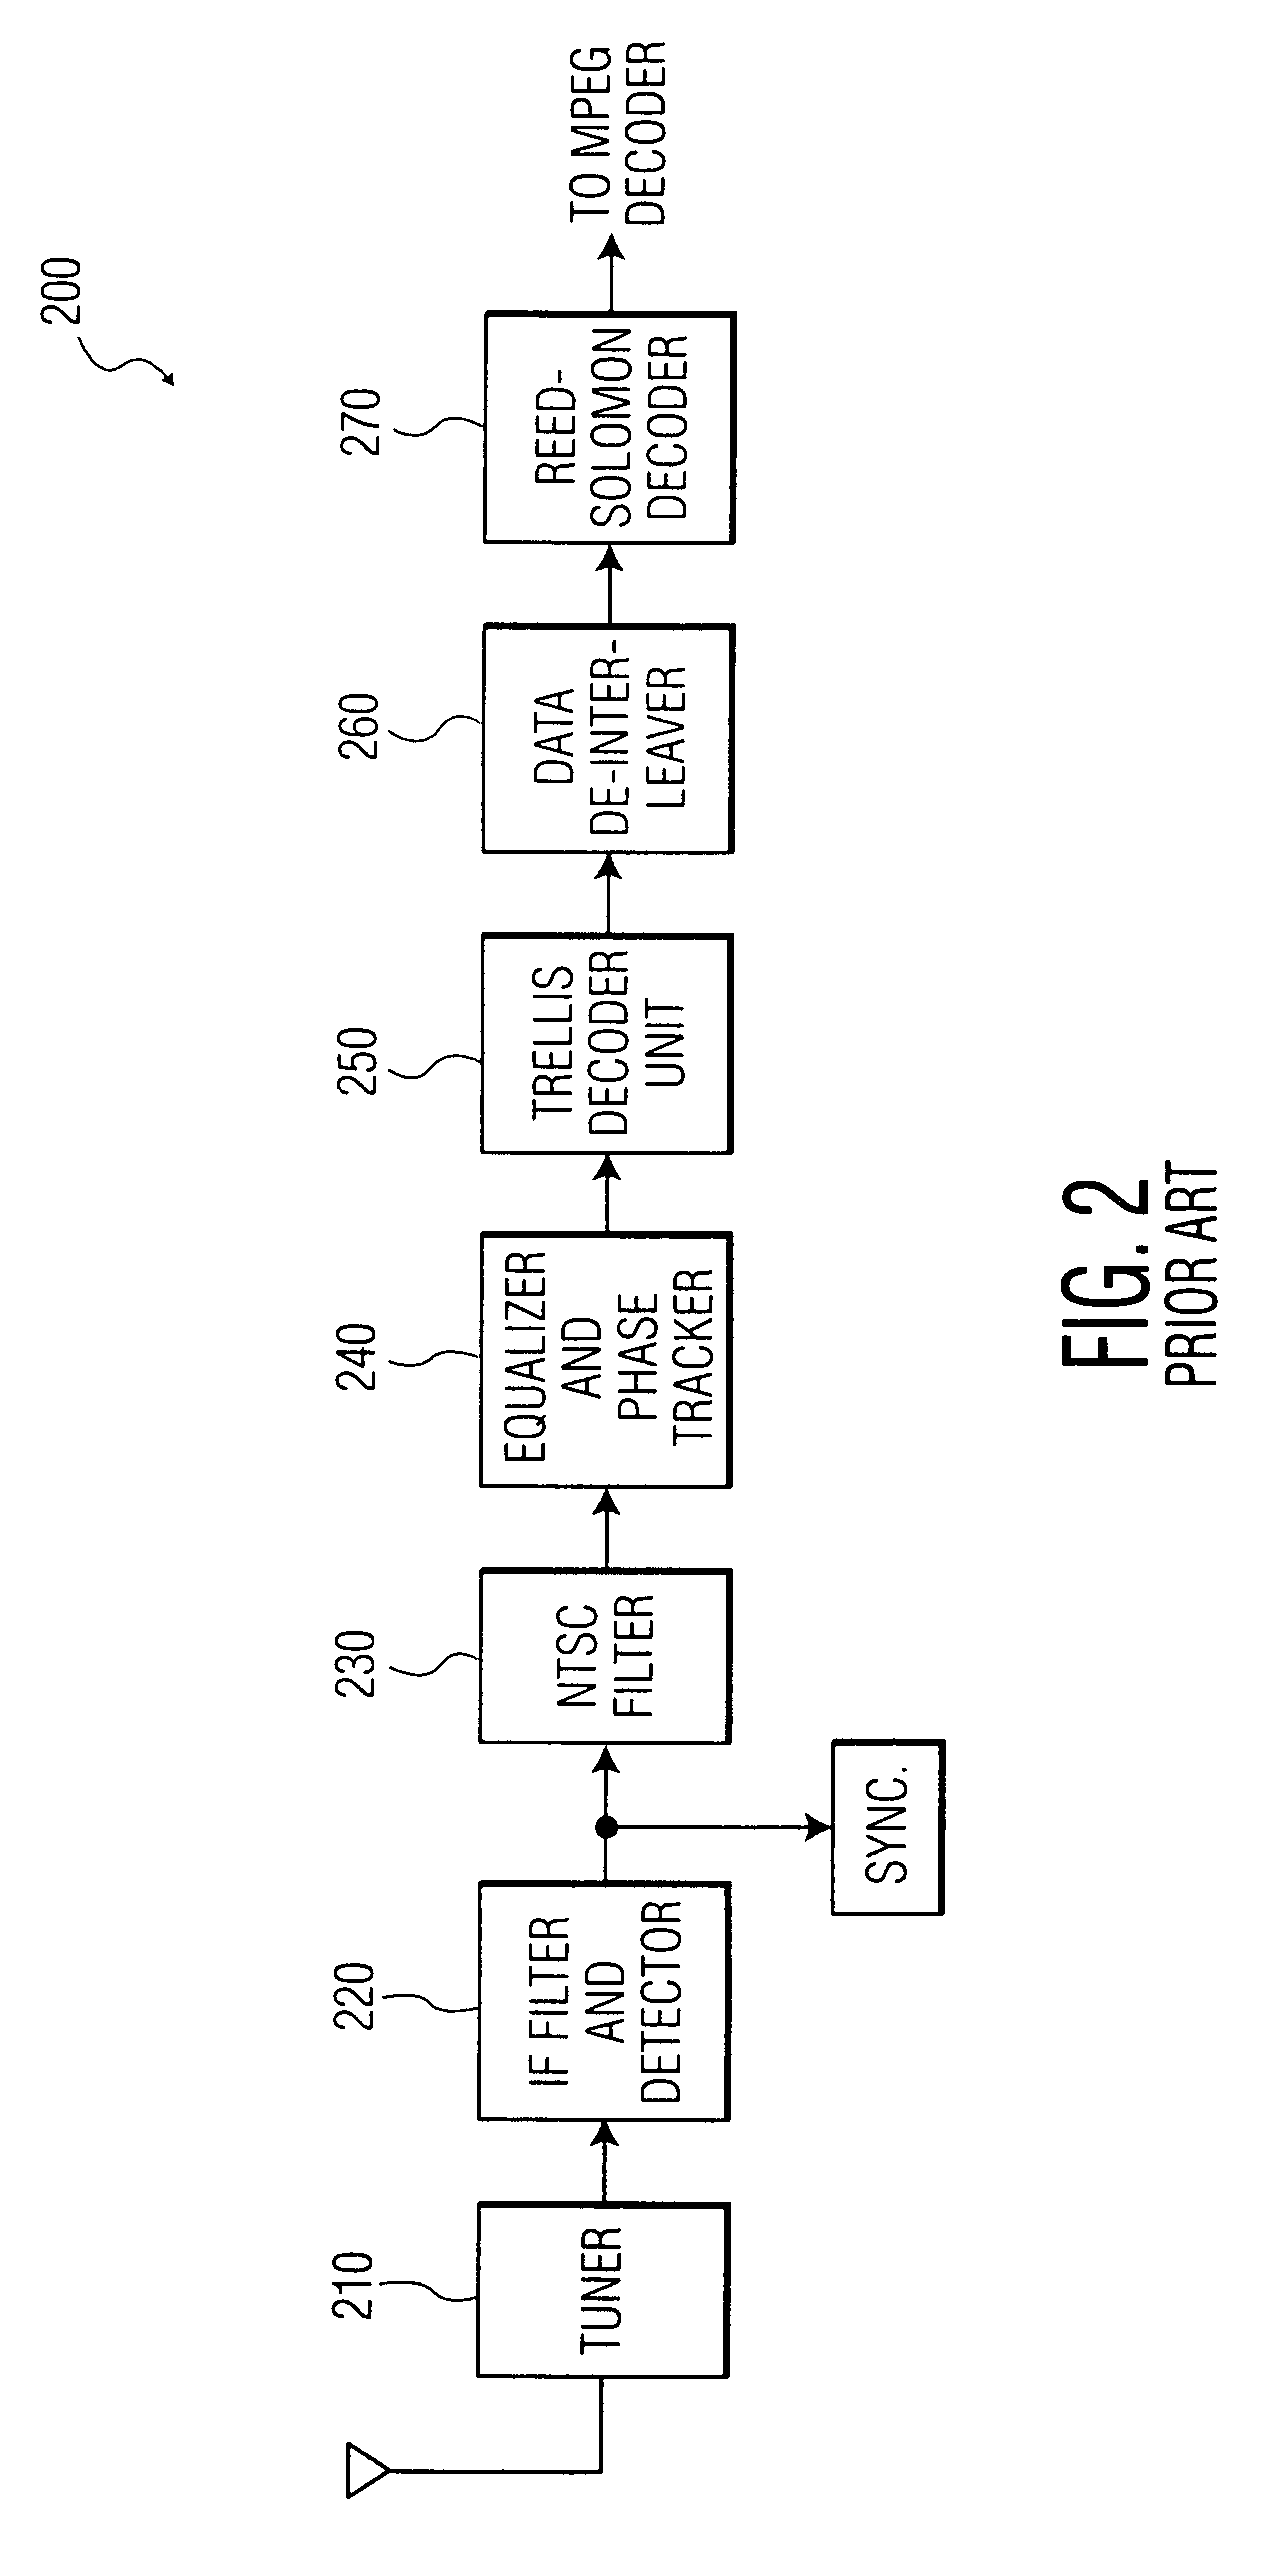 Two stage equalizer for trellis coded systems